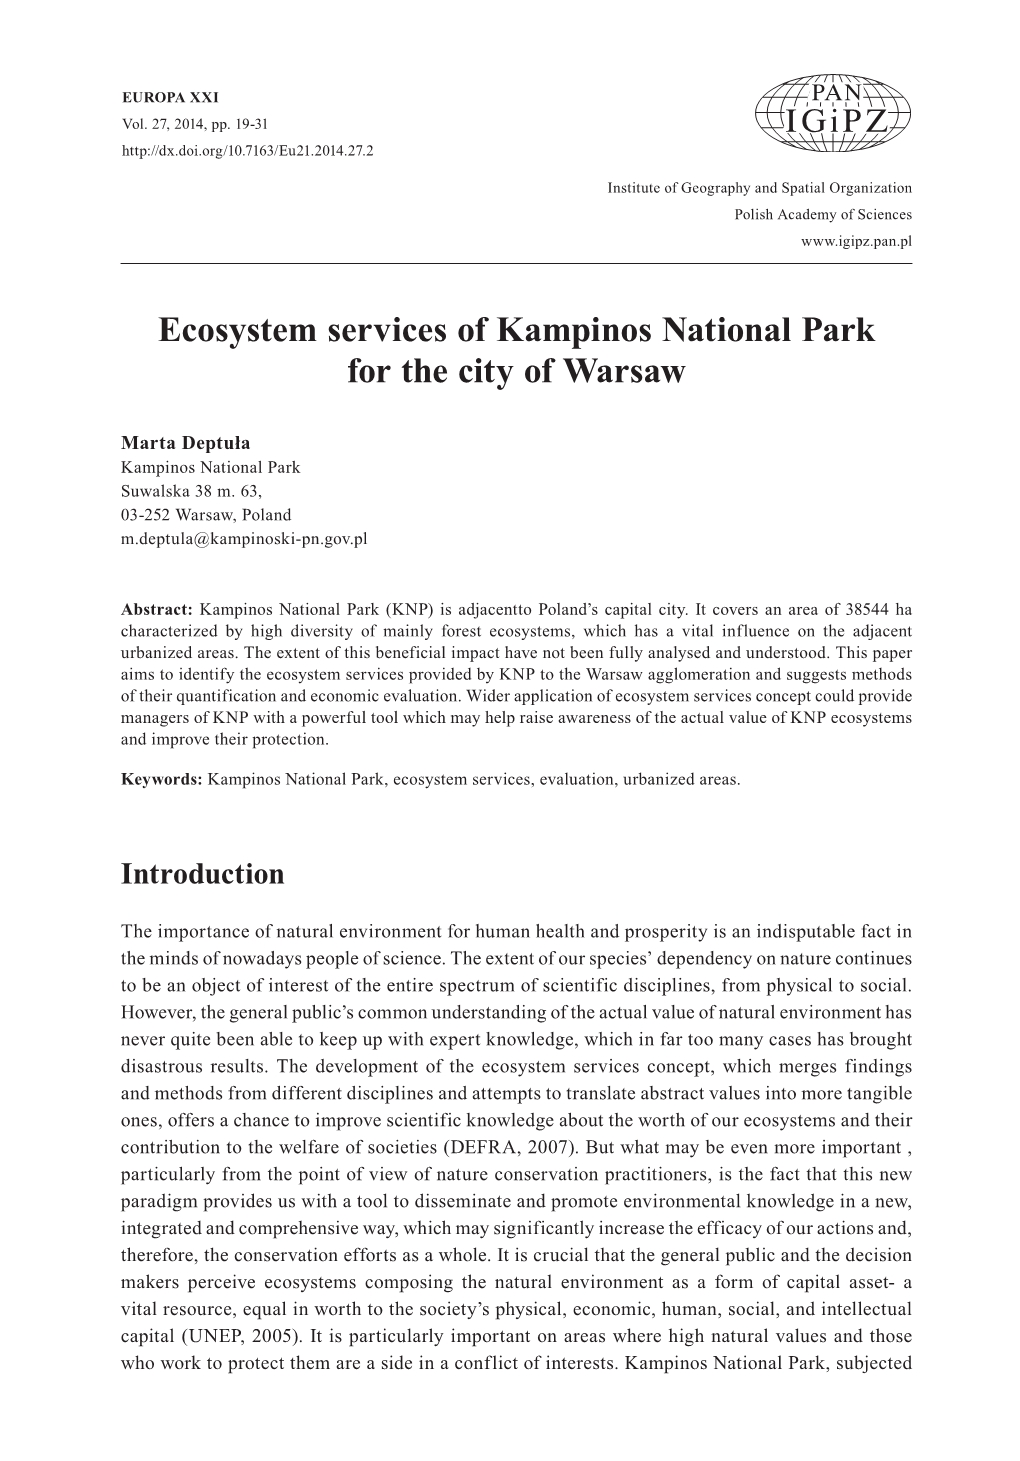 Ecosystem Services of Kampinos National Park for the City of Warsaw